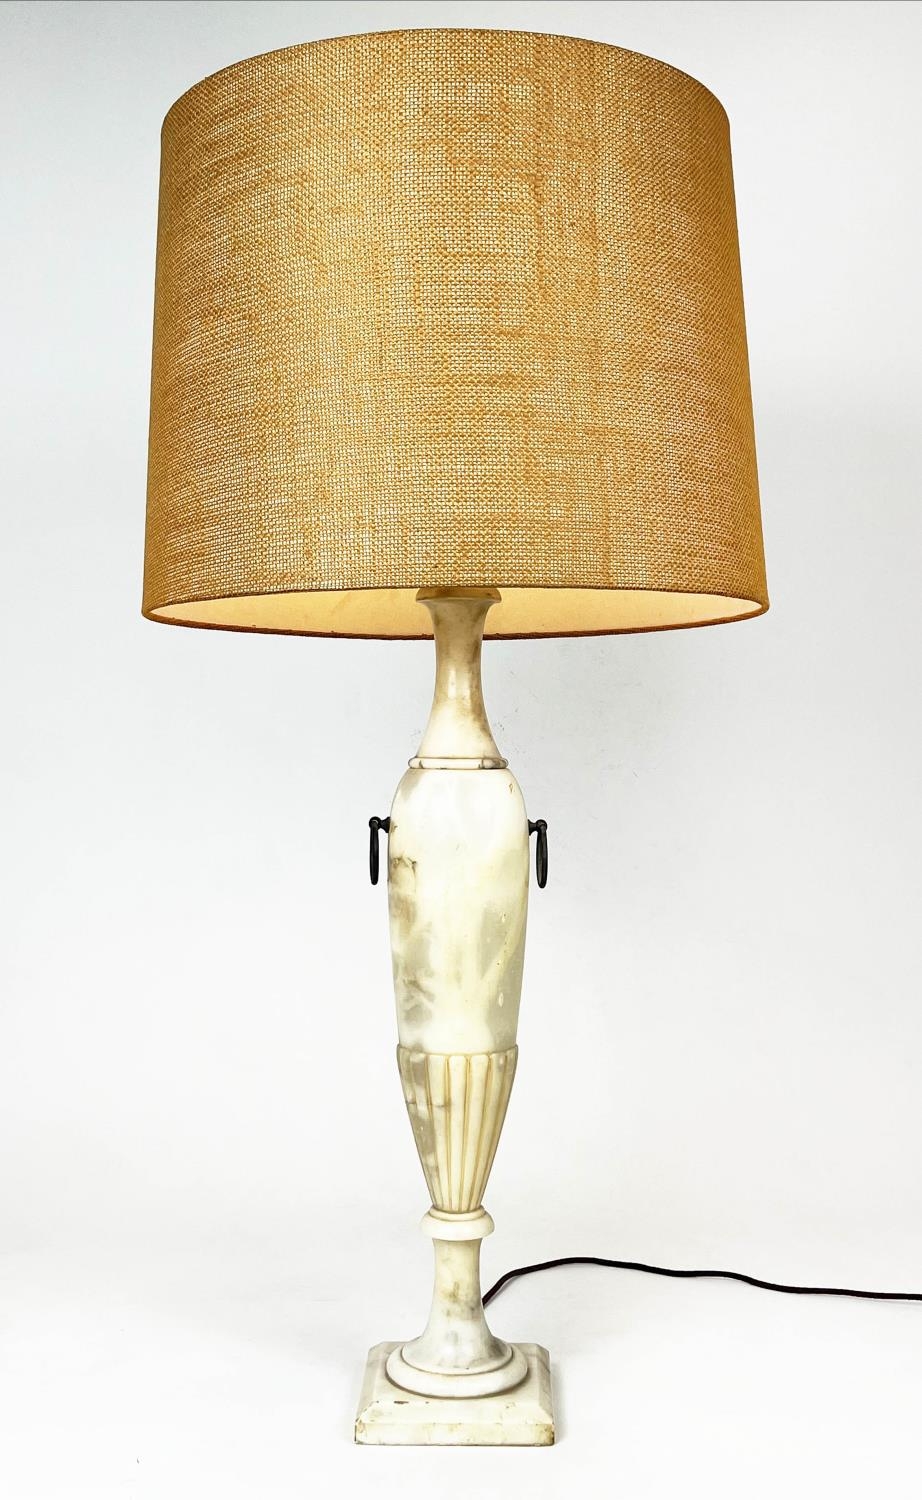 TABLE LAMP, Italian Grand Tour style, hand carved Alabaster, early/mid 20th century, with shade,